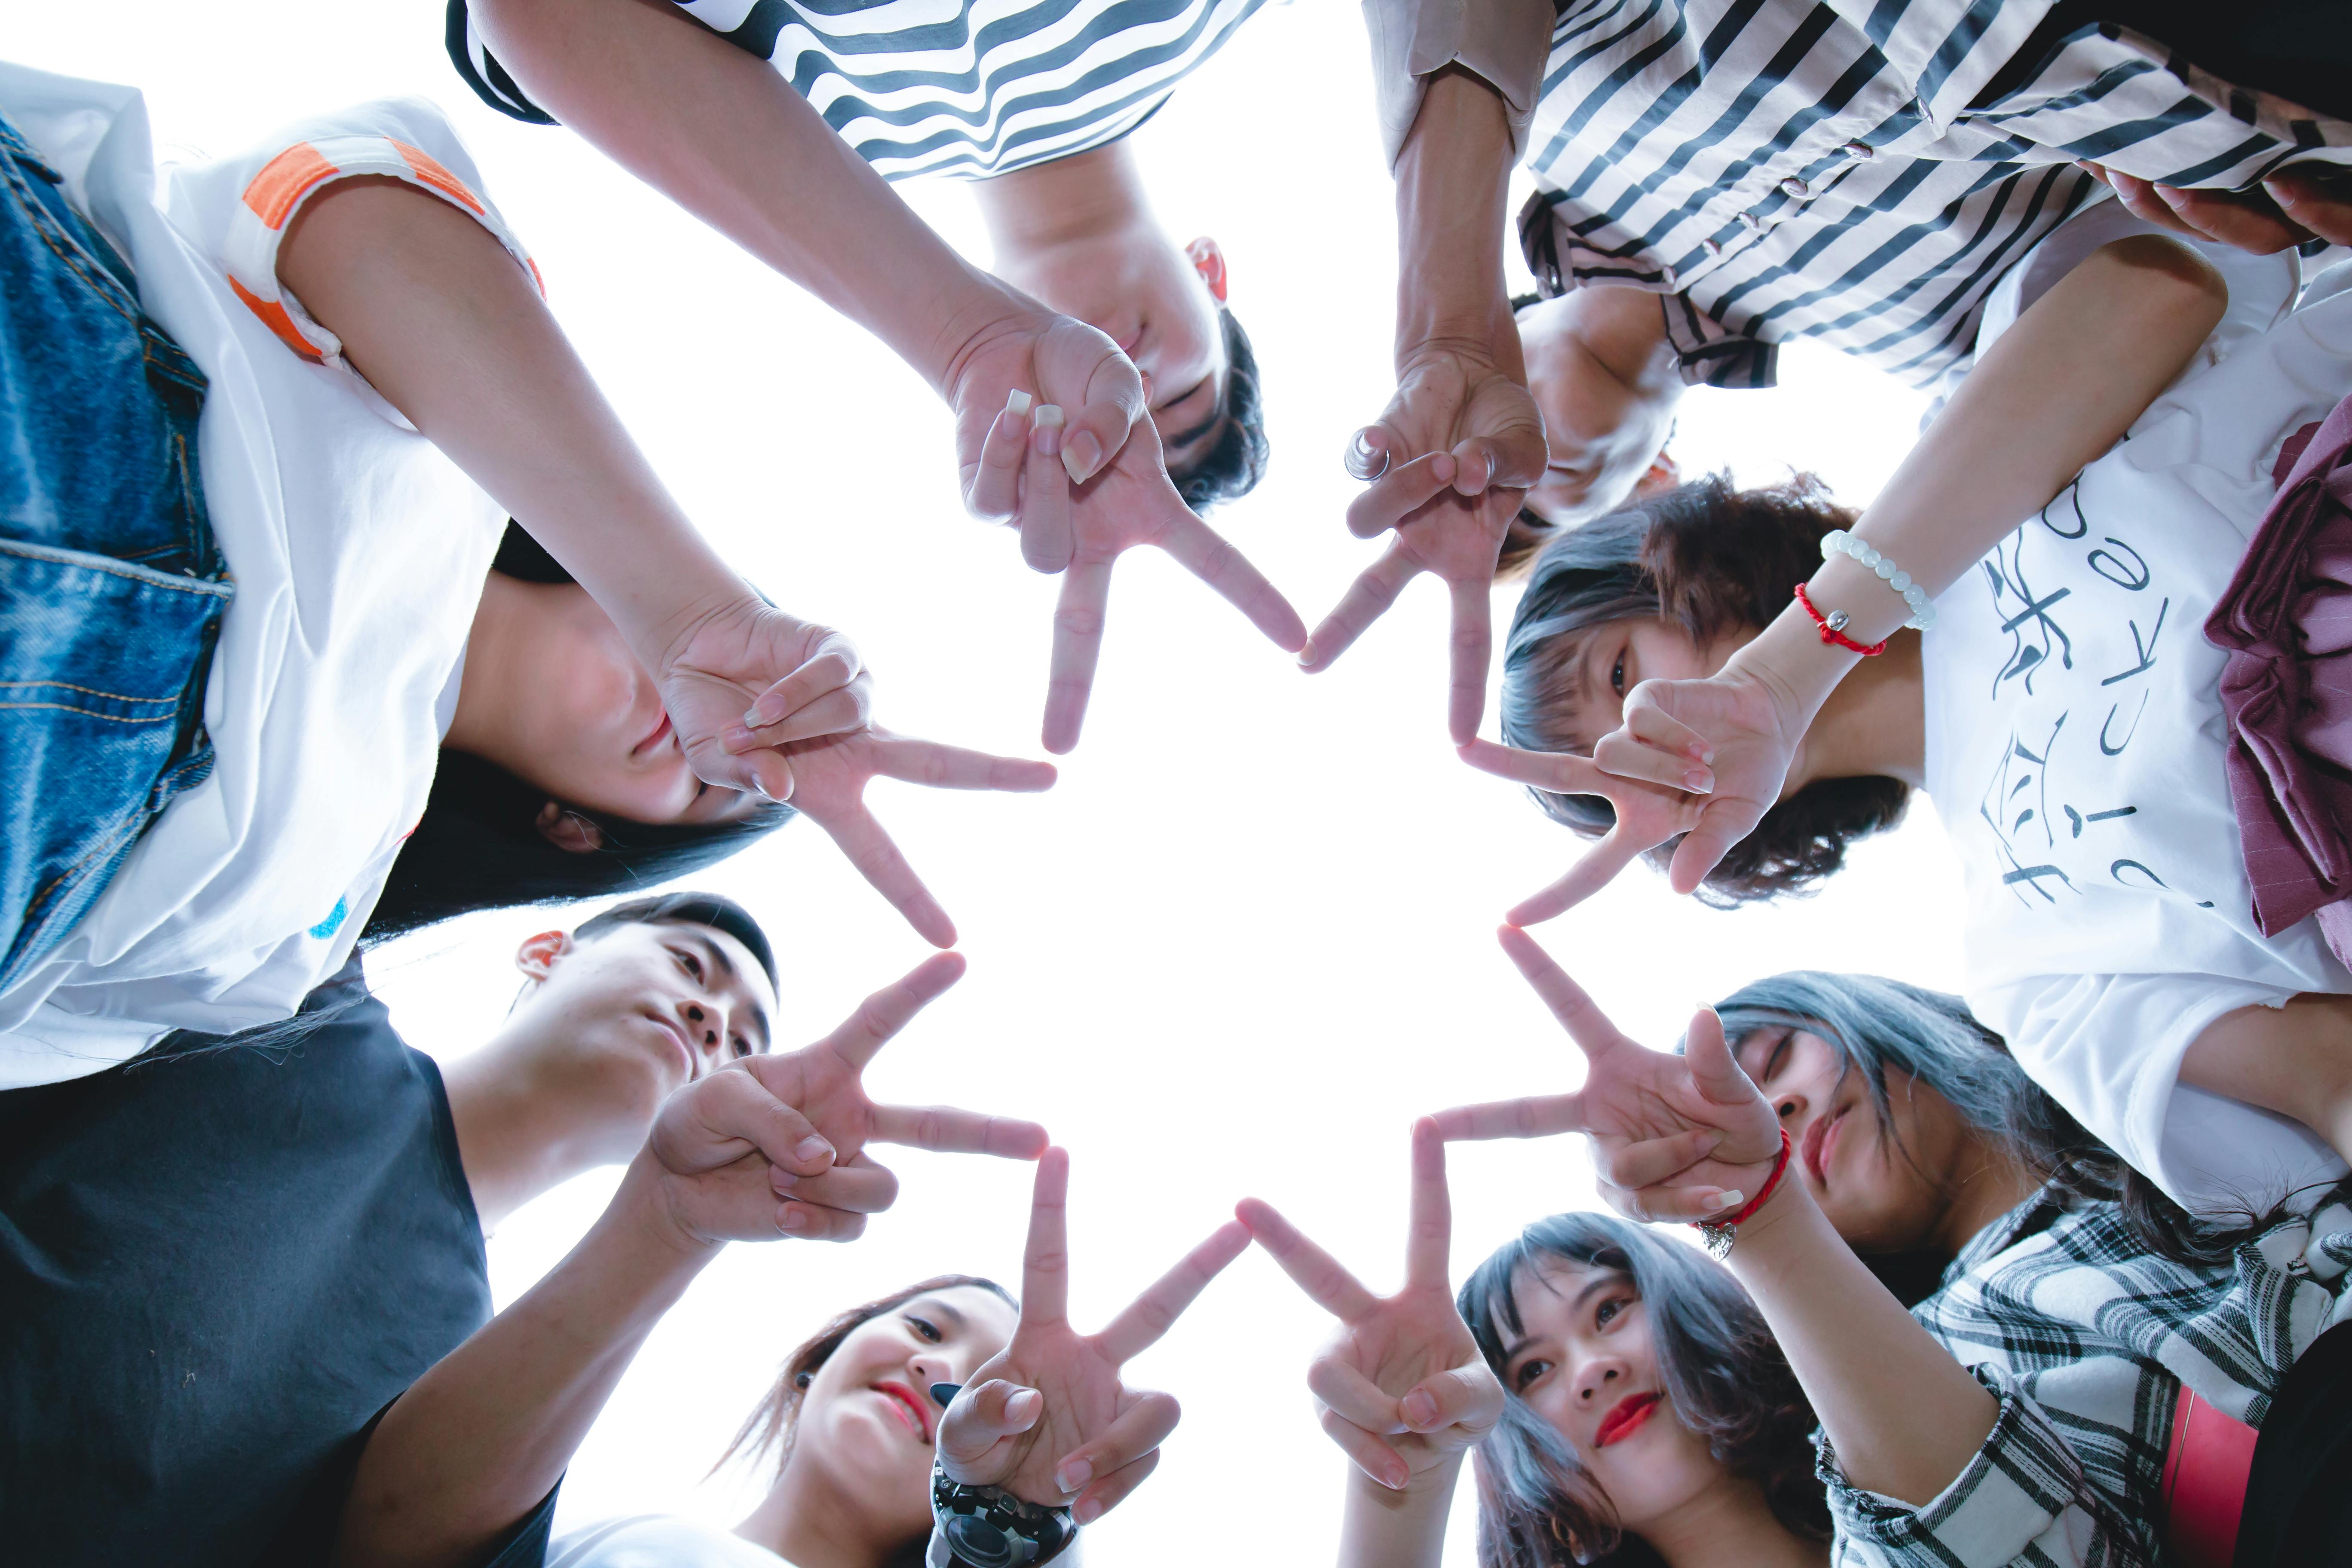 Group of People Forming Star Using Their Hands - Hotcopy